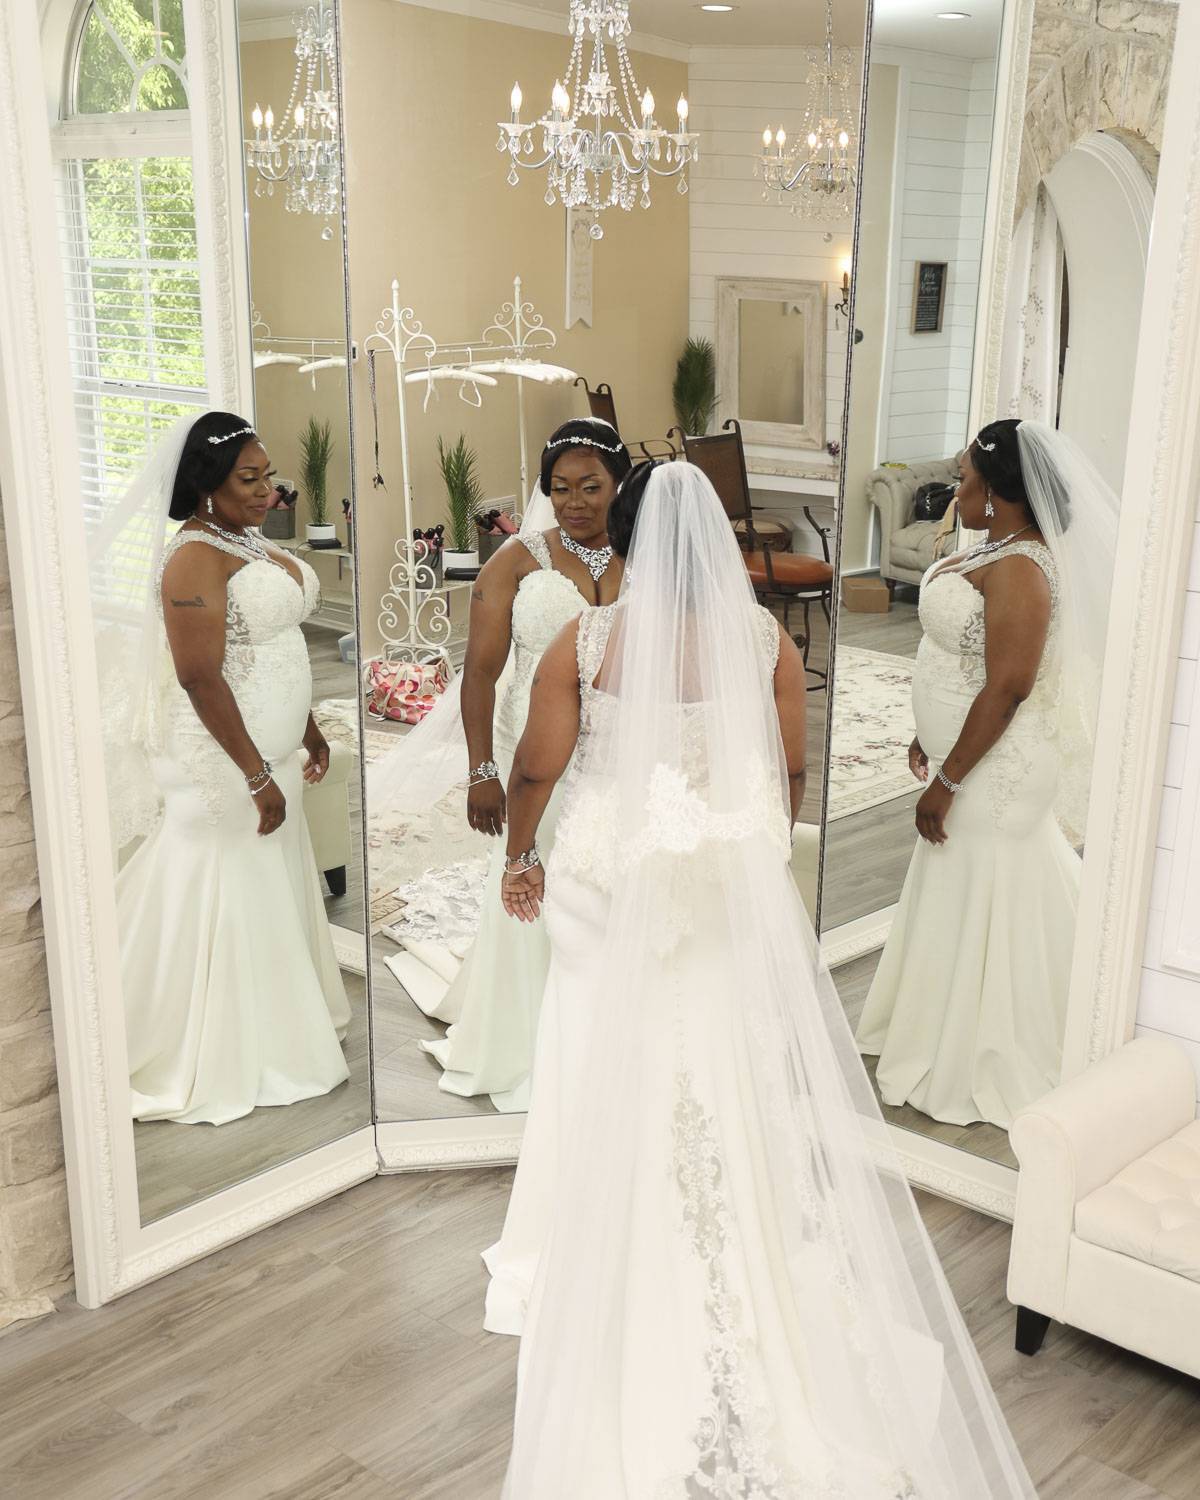 The bride in front of a mirror